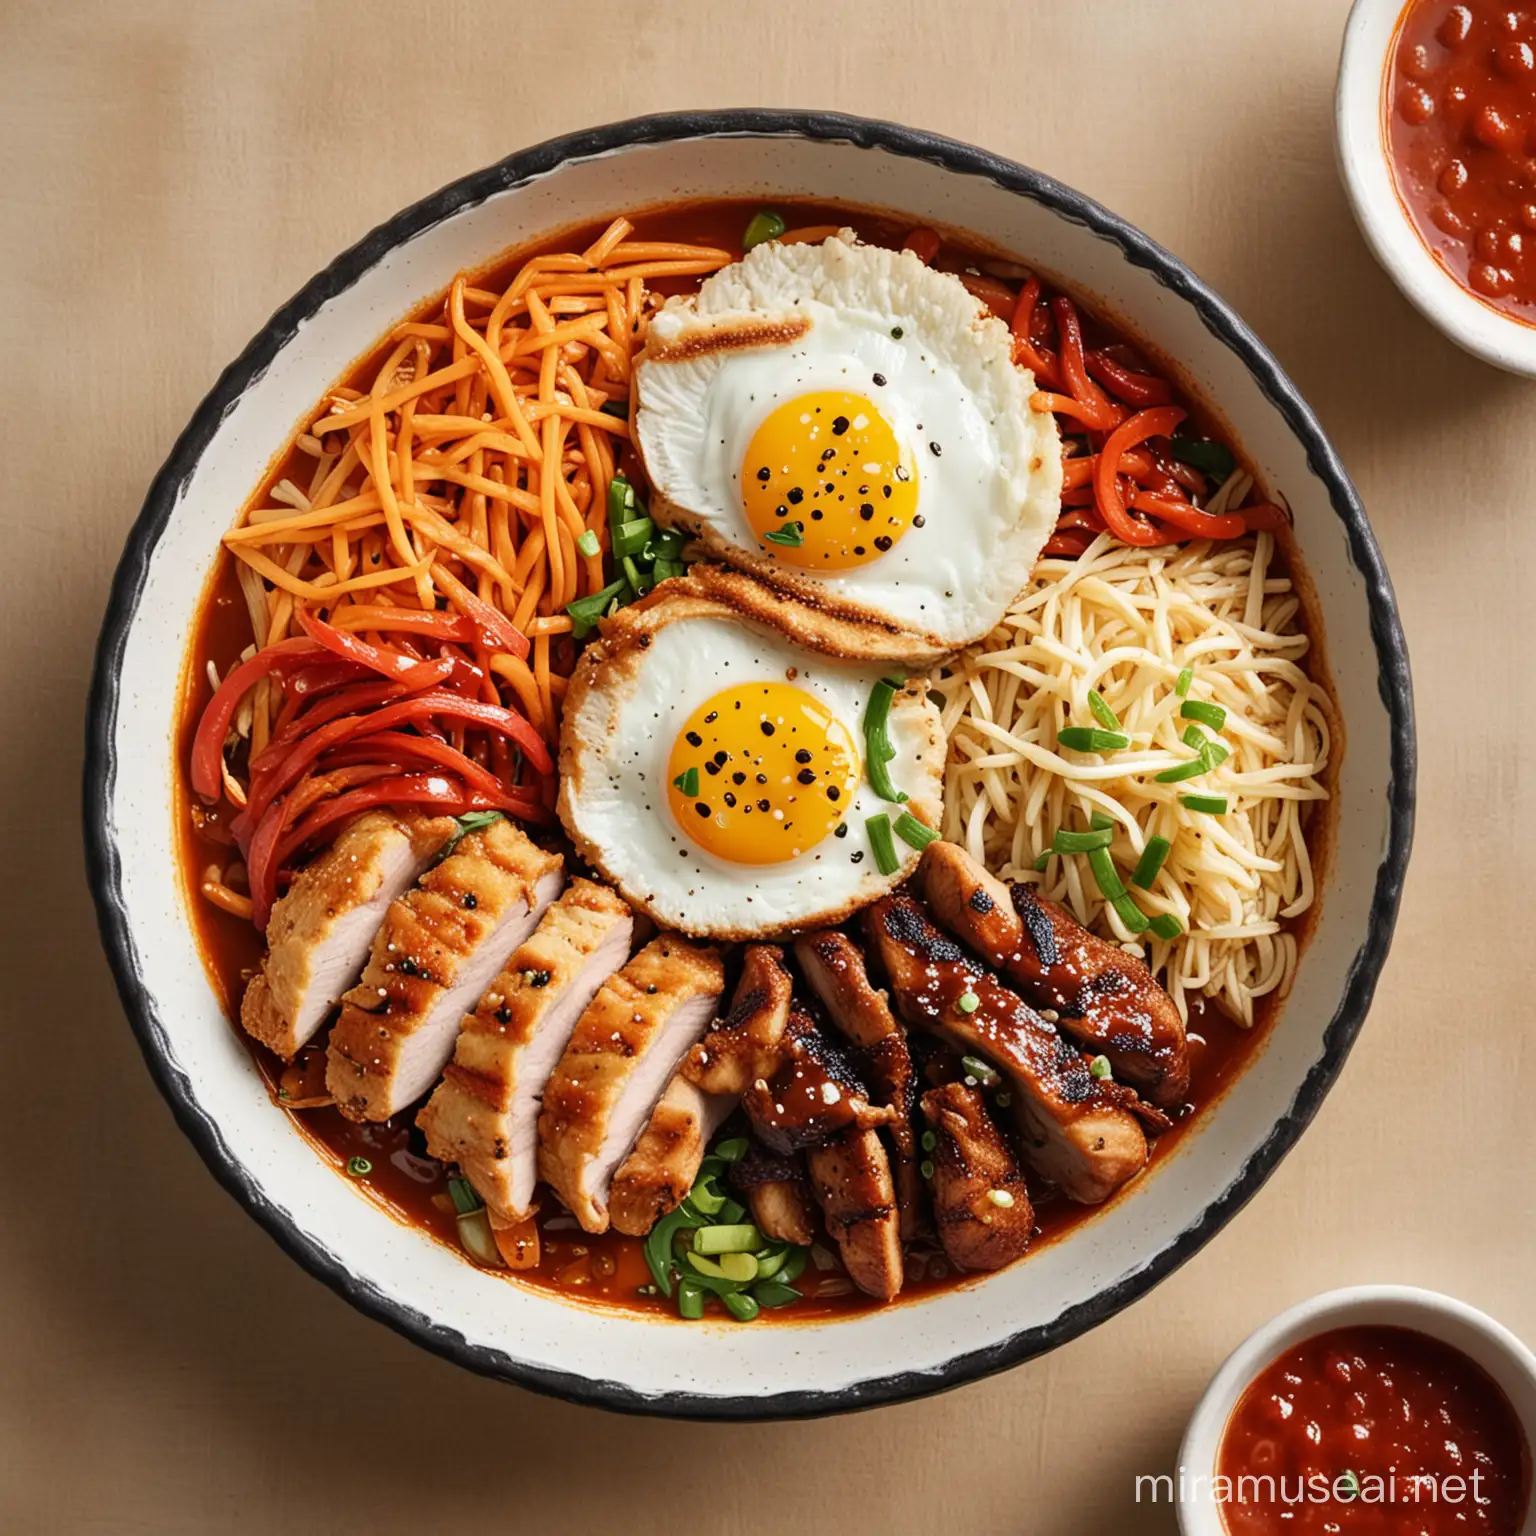 Korean Barbecue Bibimbap and Chicken Cutlet Overhead Shot with Tomato Sauce